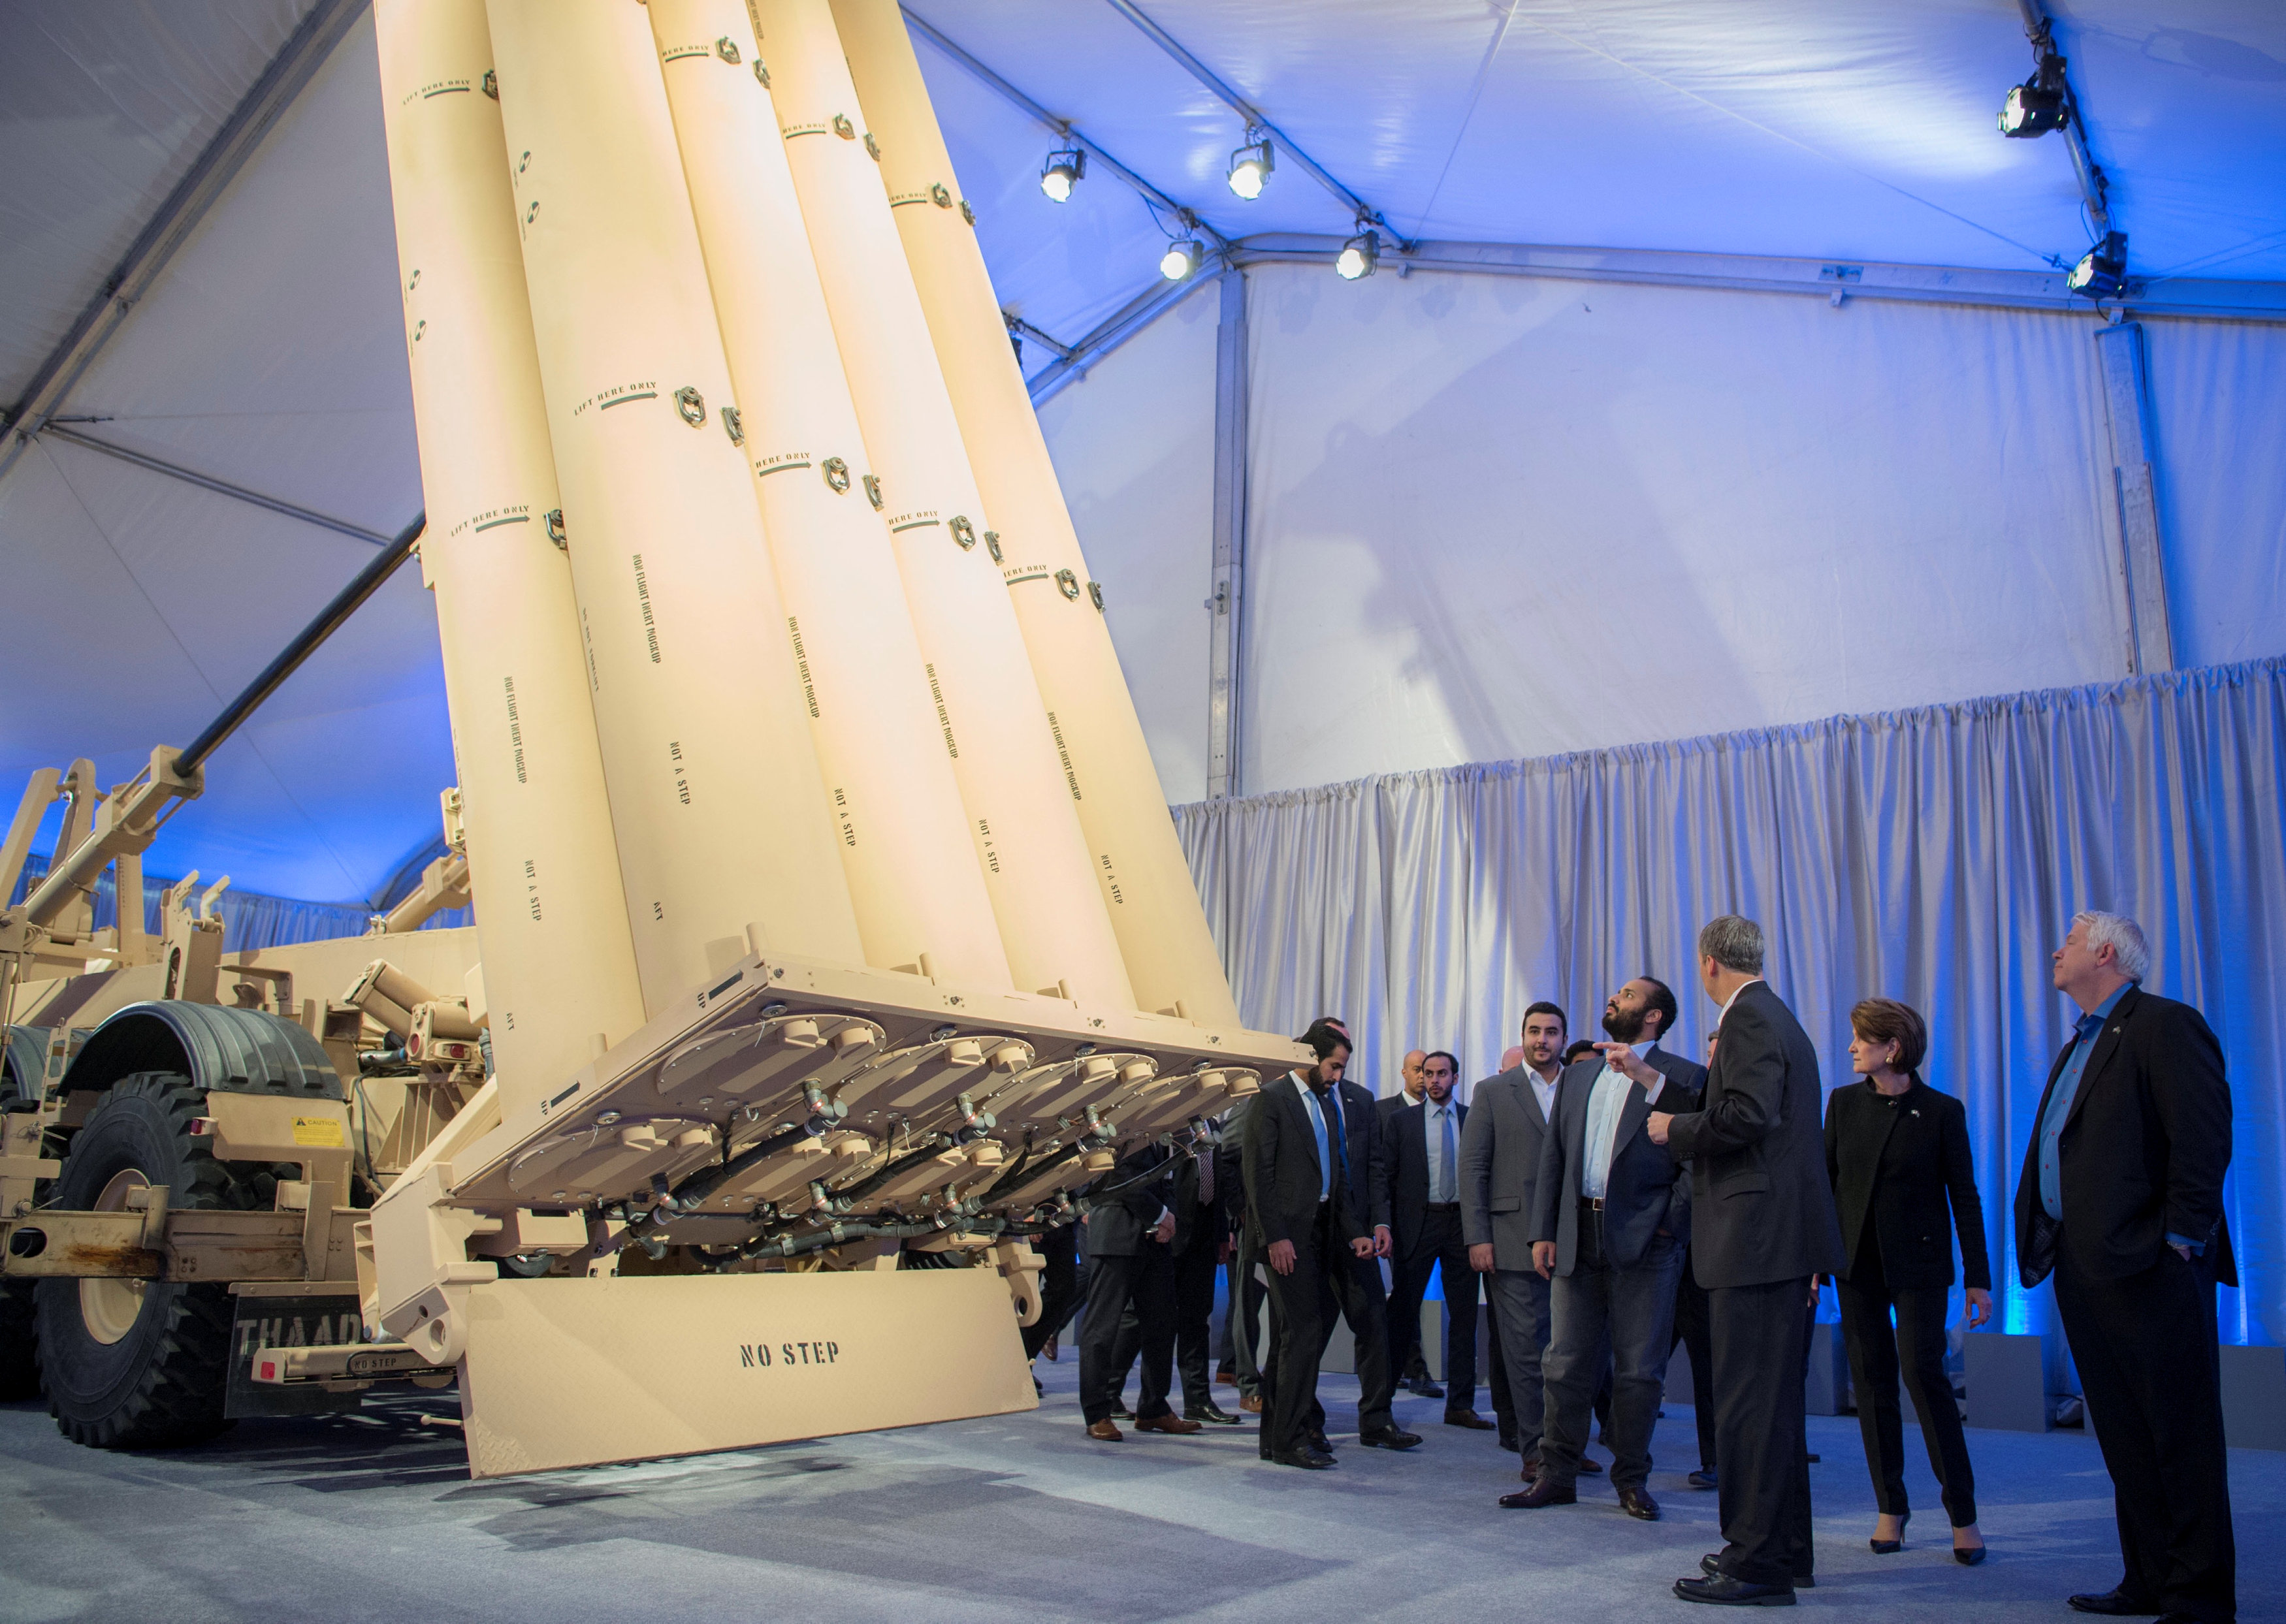 In pictures: Saudi Arabia's Crown Prince Mohammed visits Lockheed Martin company